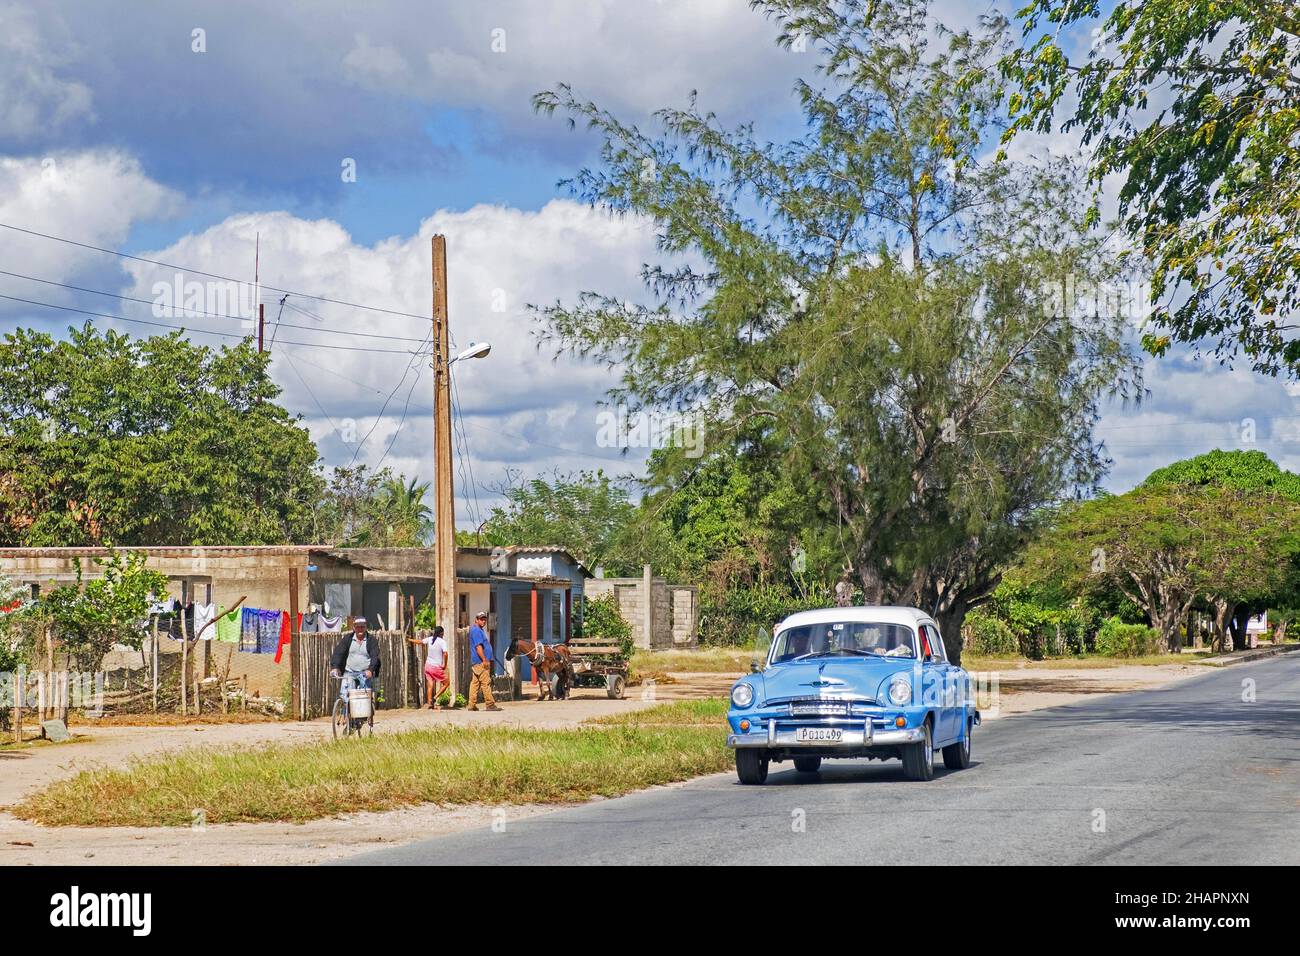 Vintage American classic car driving on the Carretera Central / CC / Central Road, west-east highway spanning the length of the island of Cuba, Camagü Stock Photo